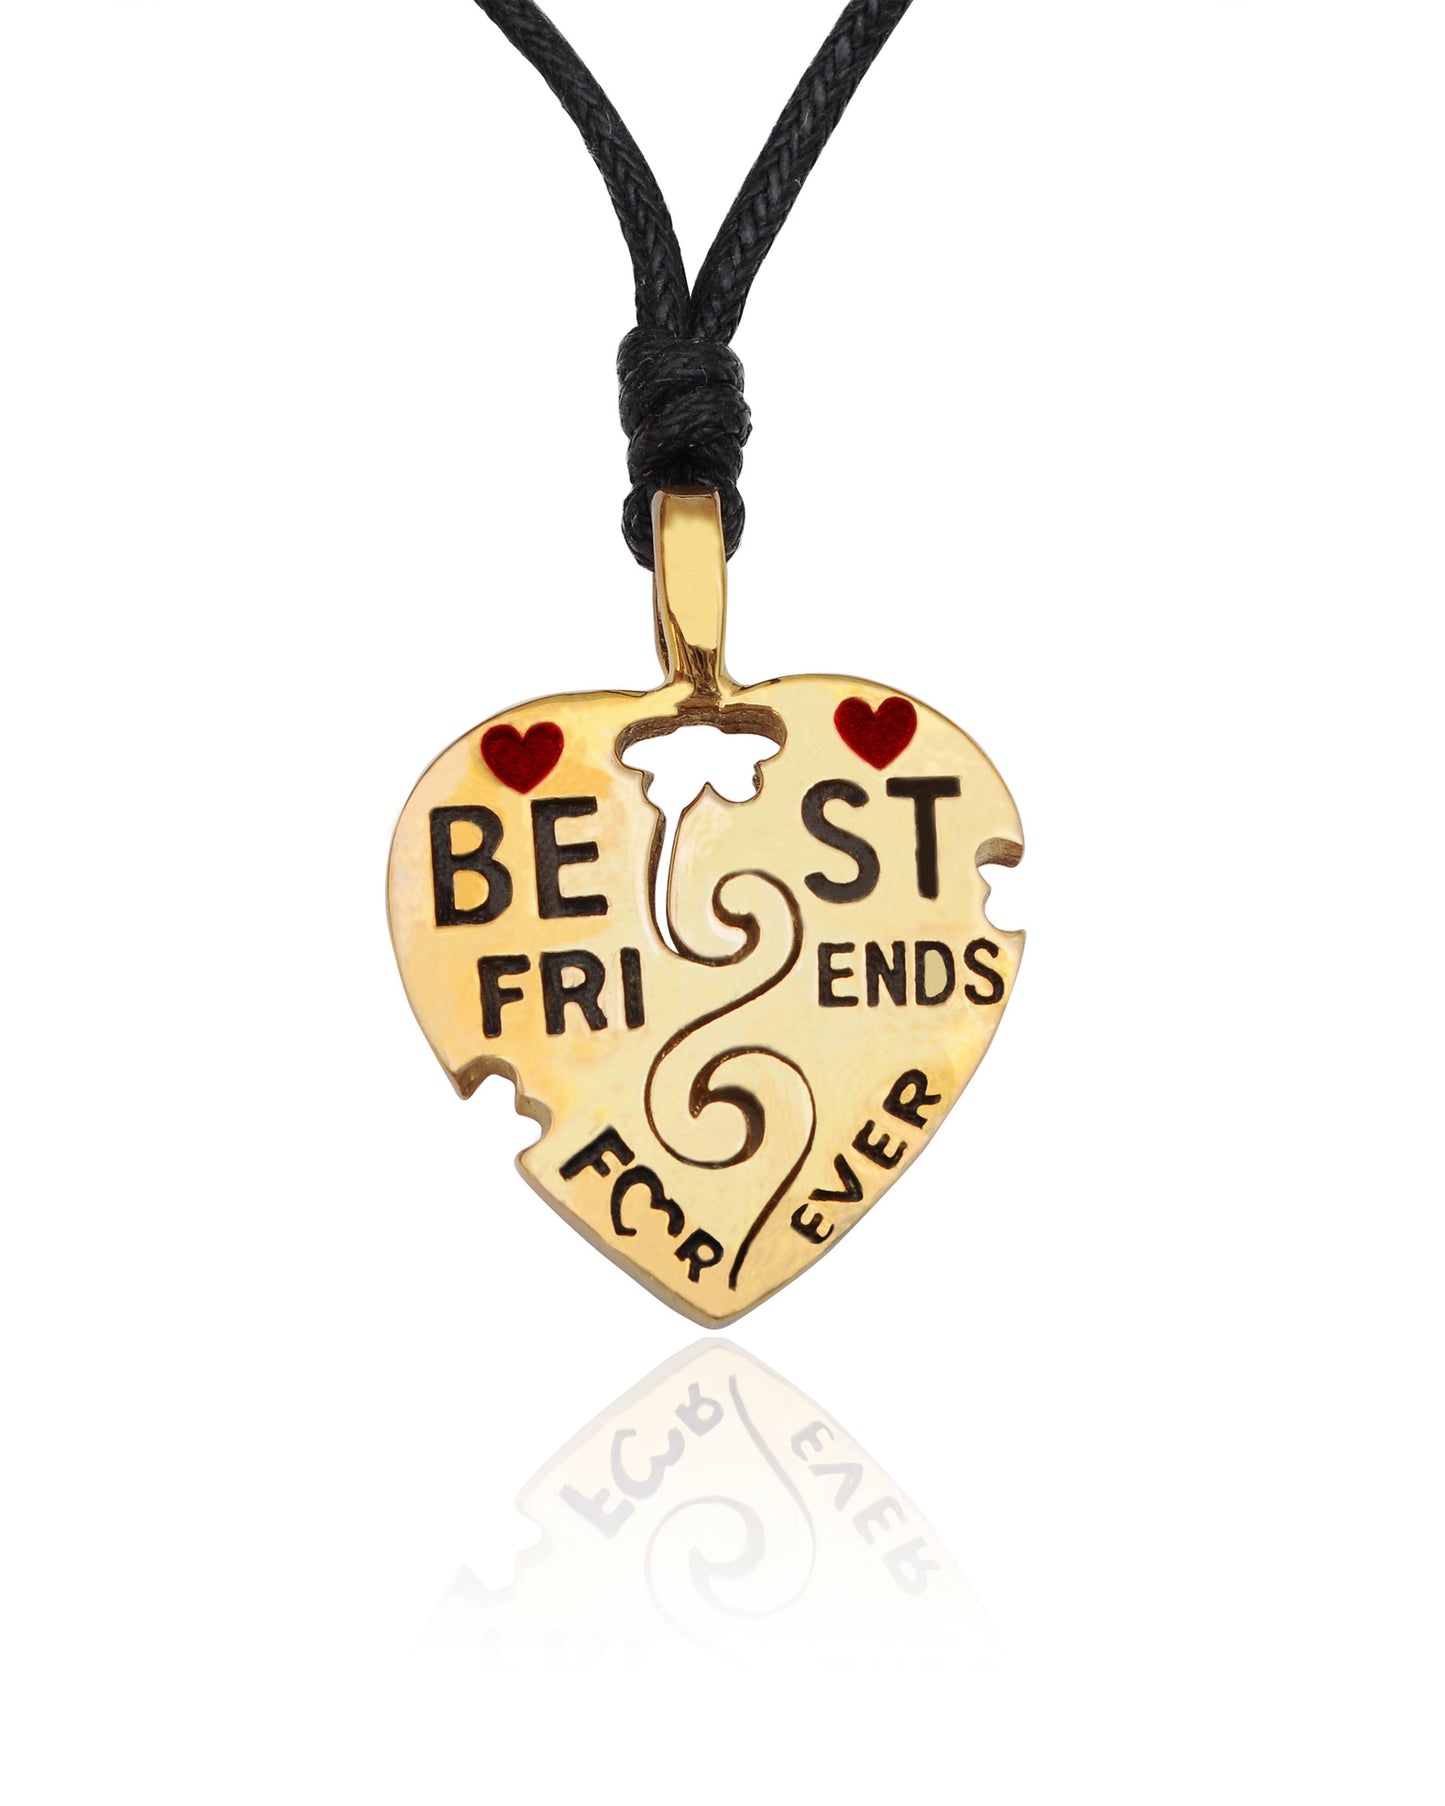 Best Friends Ying Yang Silver Pewter Gold Brass Charm Necklace Pendant Jewelry